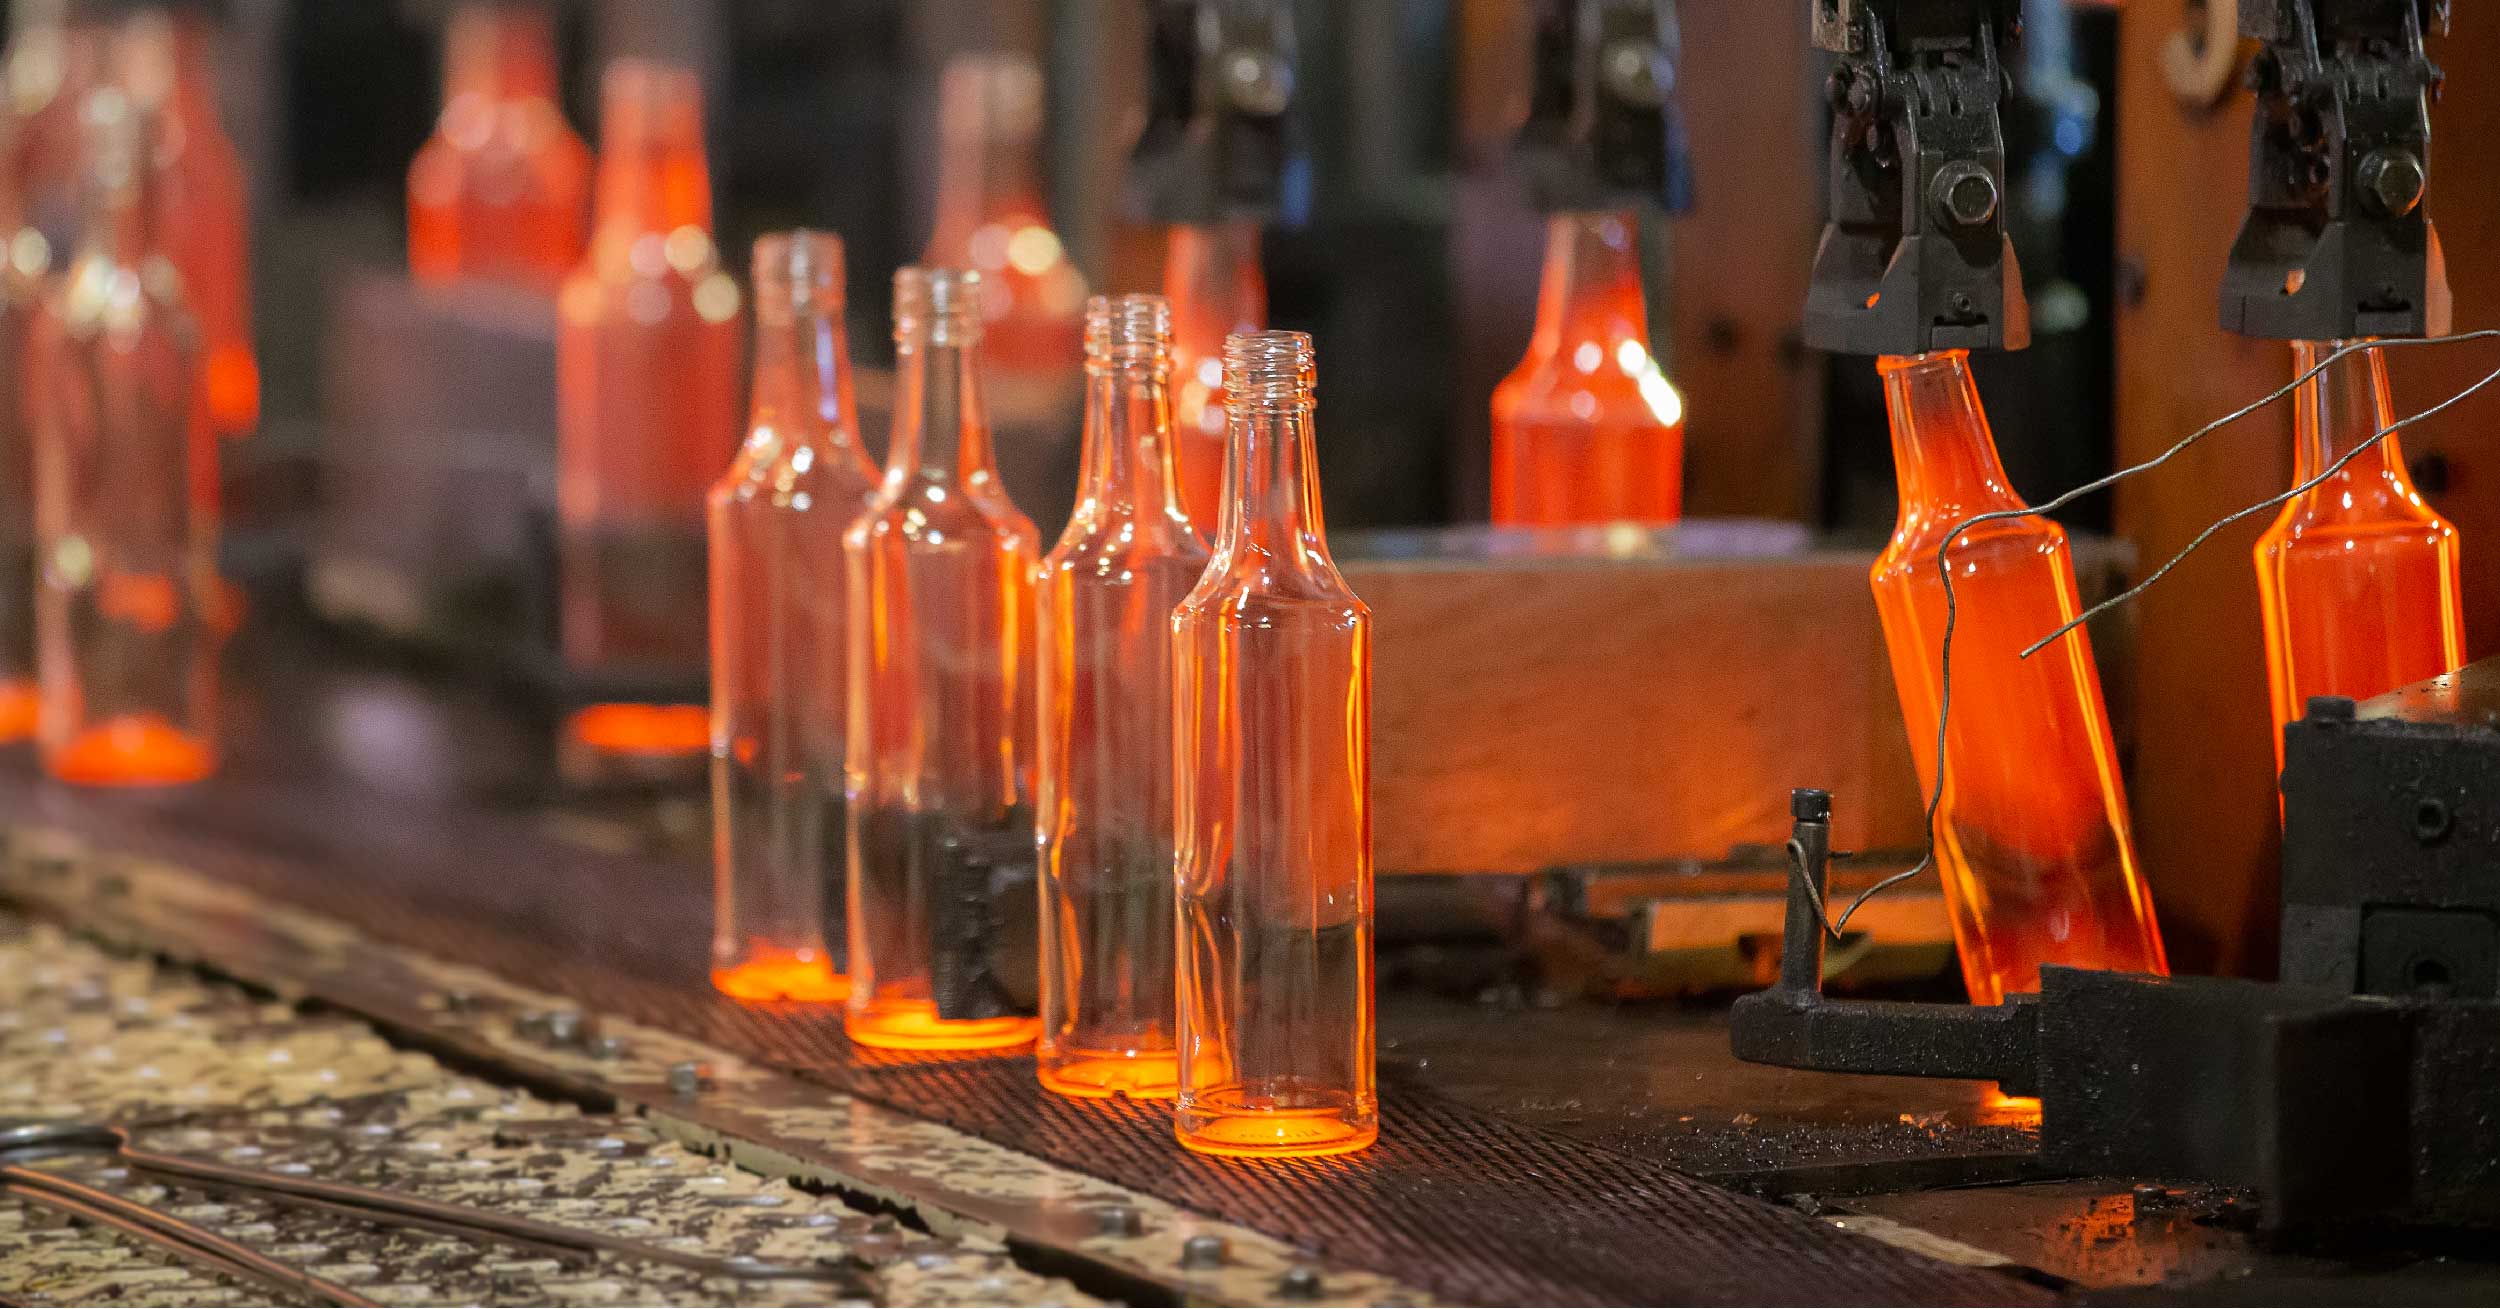 Red hot glass bottles in a glass manufacturing plant with a conveyor belt. Glass manufacturing is a critical process and it is very sensitive to poor power quality issues like harmonic distortion.